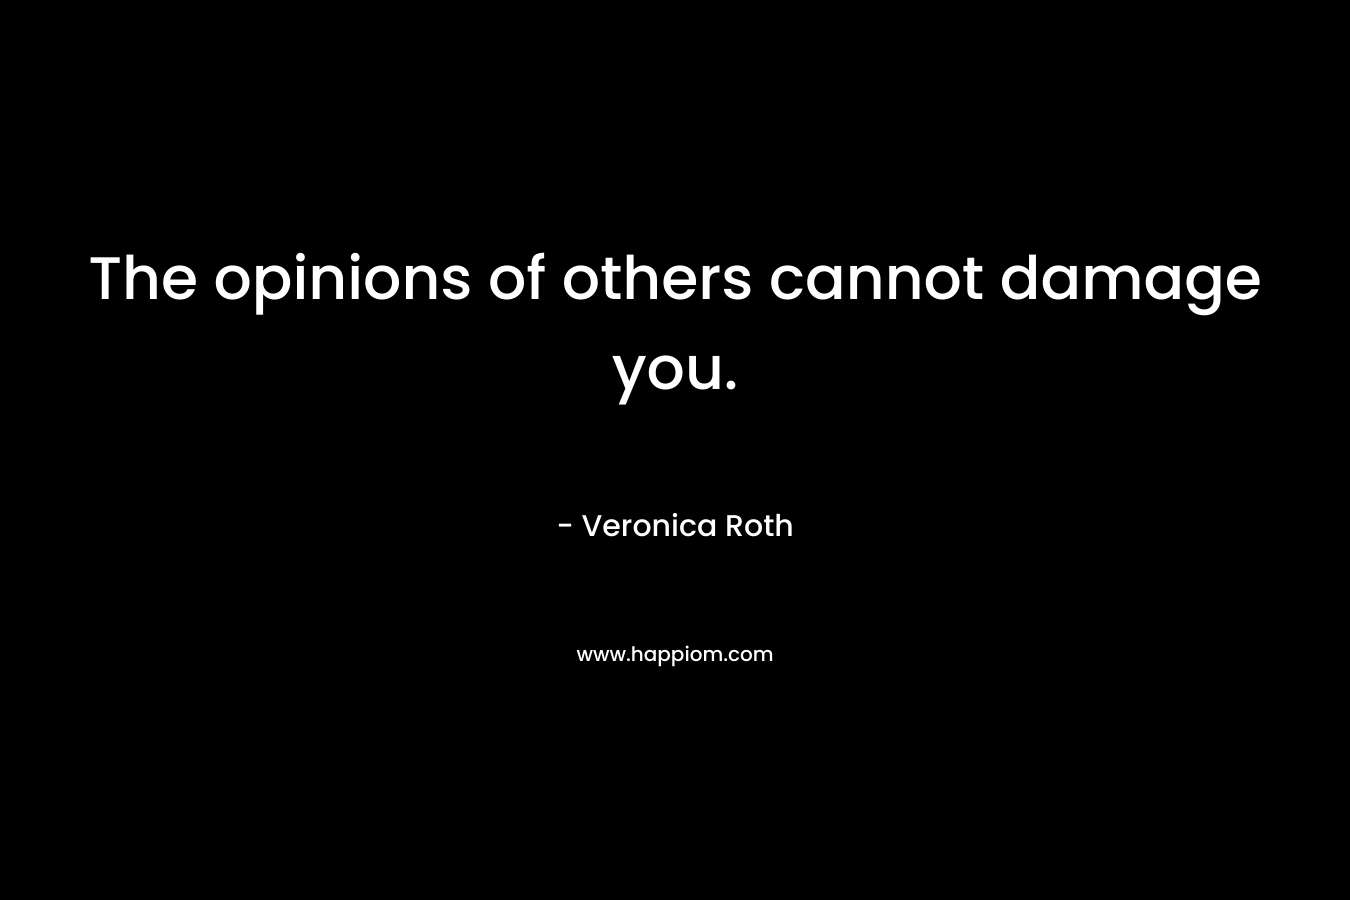 The opinions of others cannot damage you. – Veronica Roth